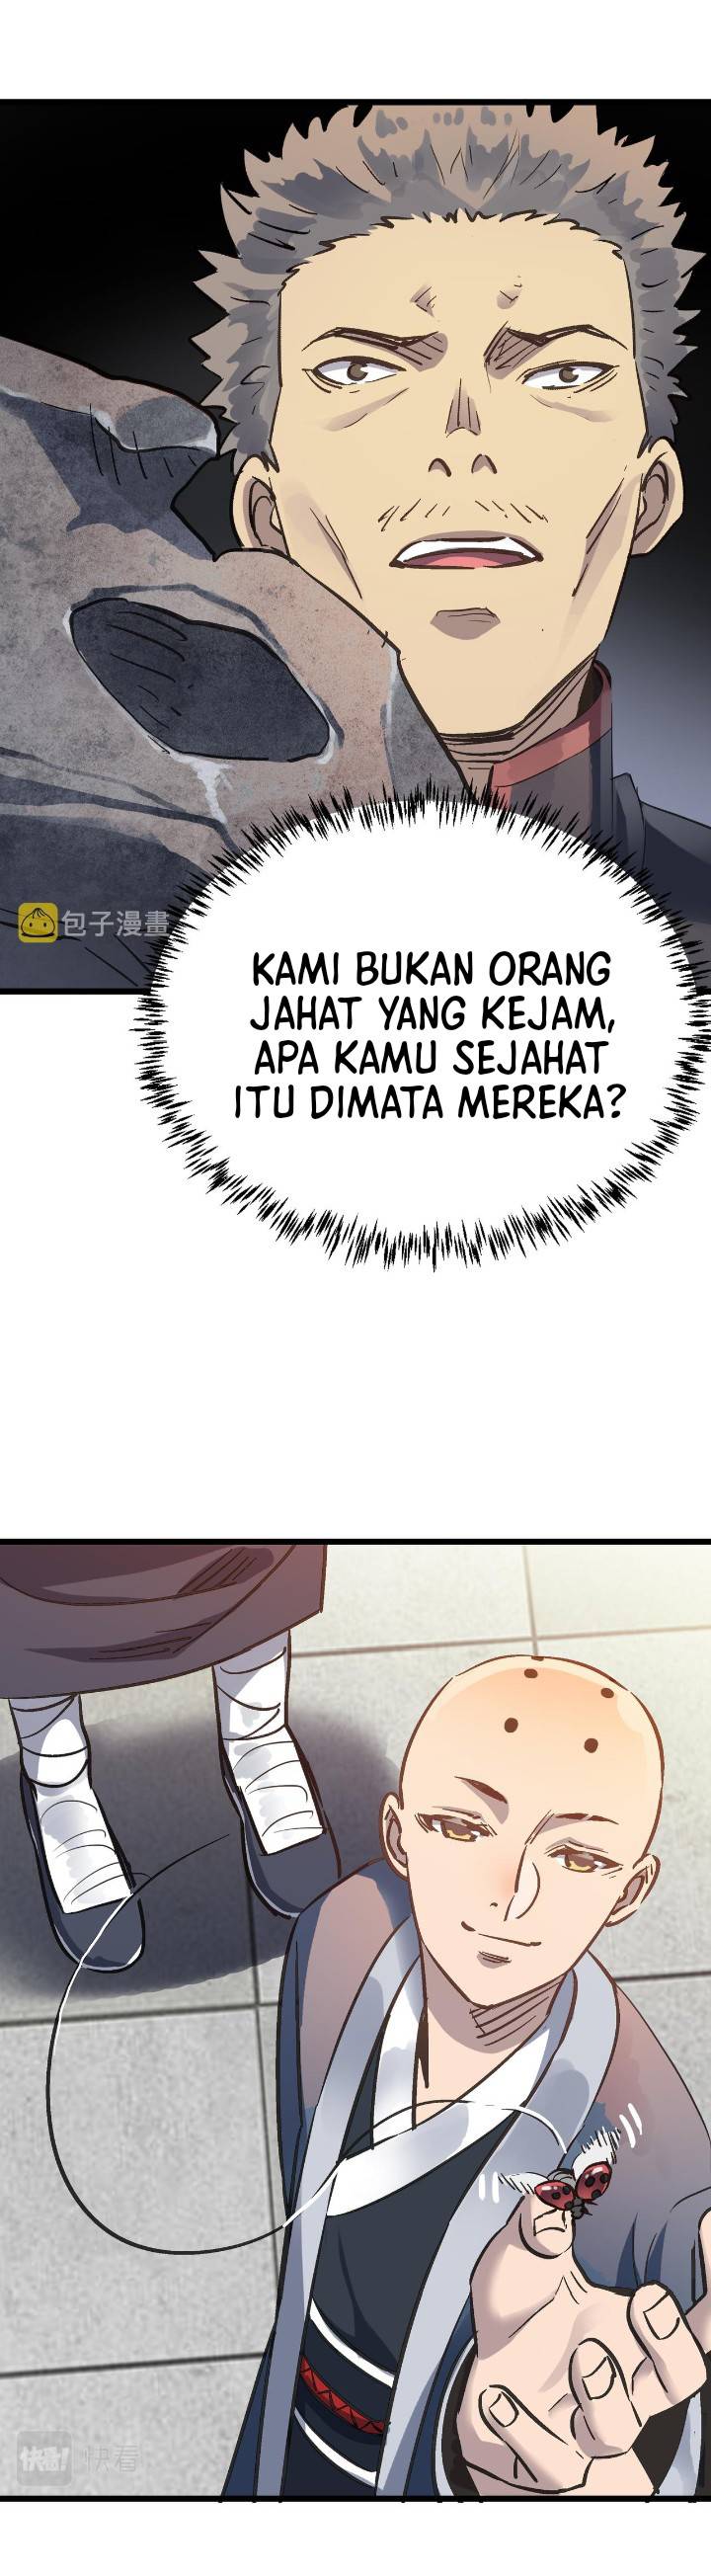 Dilarang COPAS - situs resmi www.mangacanblog.com - Komik building the strongest shaolin temple in another world 055 - chapter 55 56 Indonesia building the strongest shaolin temple in another world 055 - chapter 55 Terbaru 12|Baca Manga Komik Indonesia|Mangacan